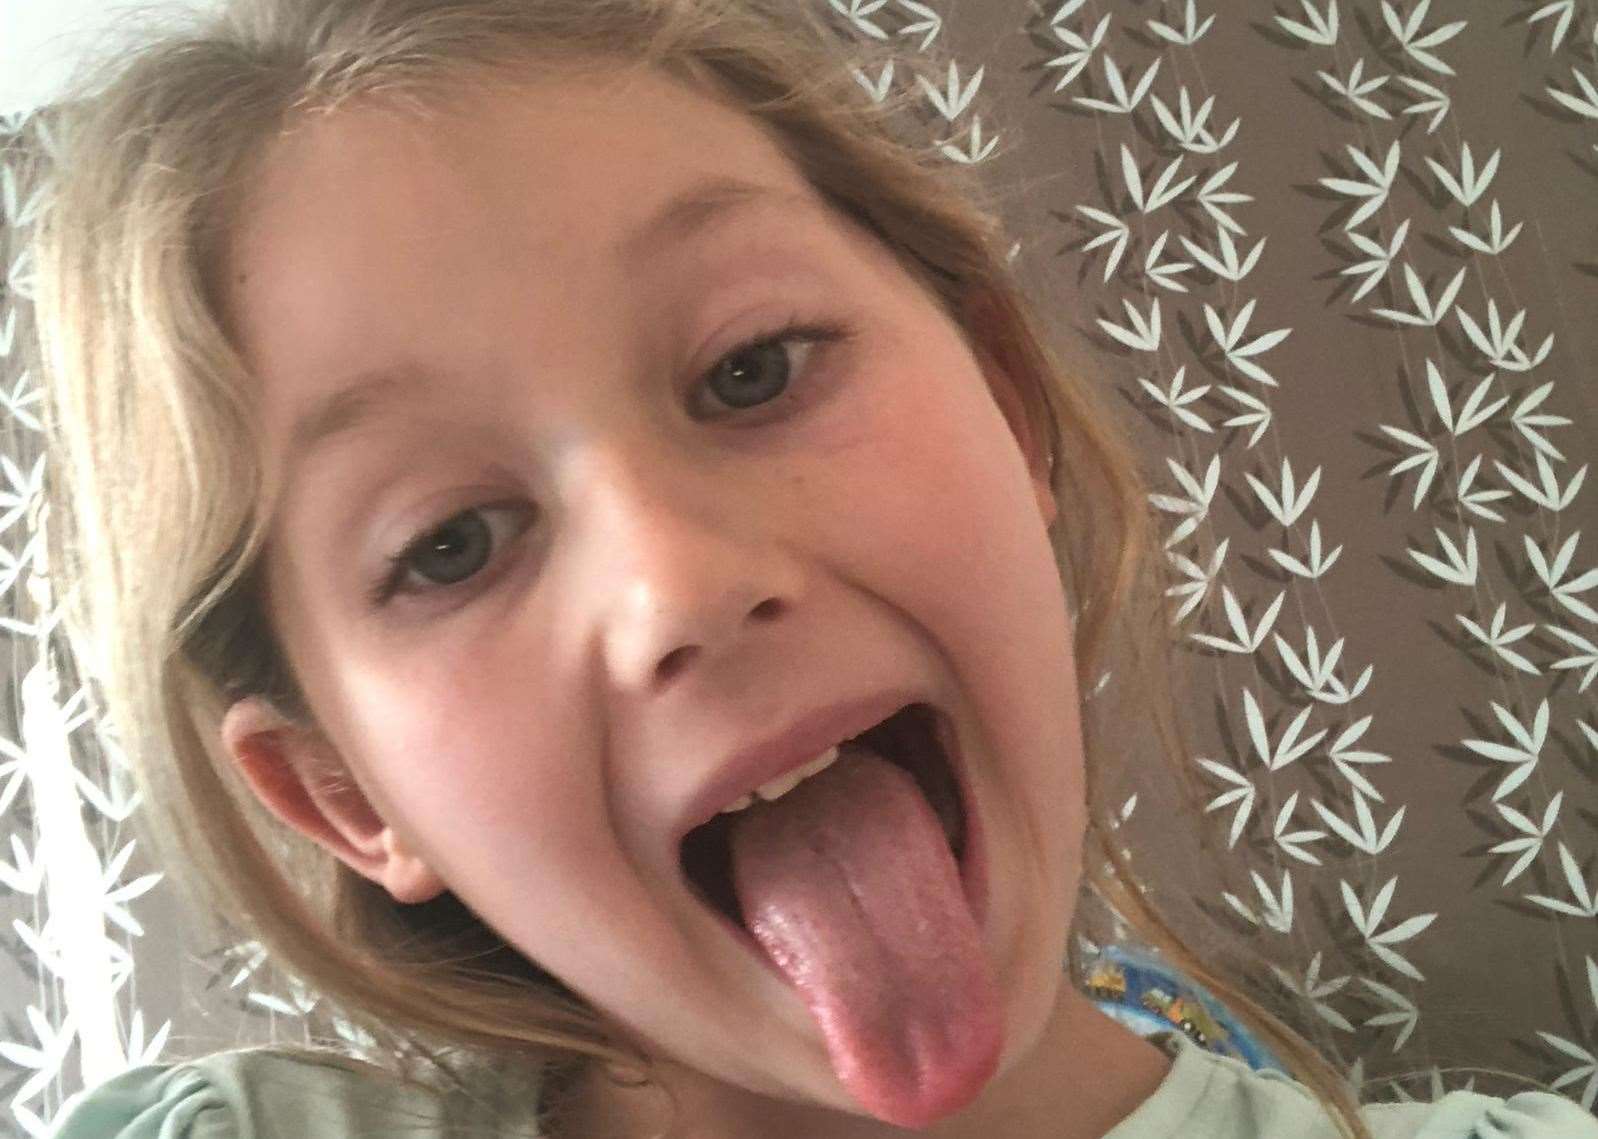 Lyrah's family are hoping to raise awareness about her condition (12279801)